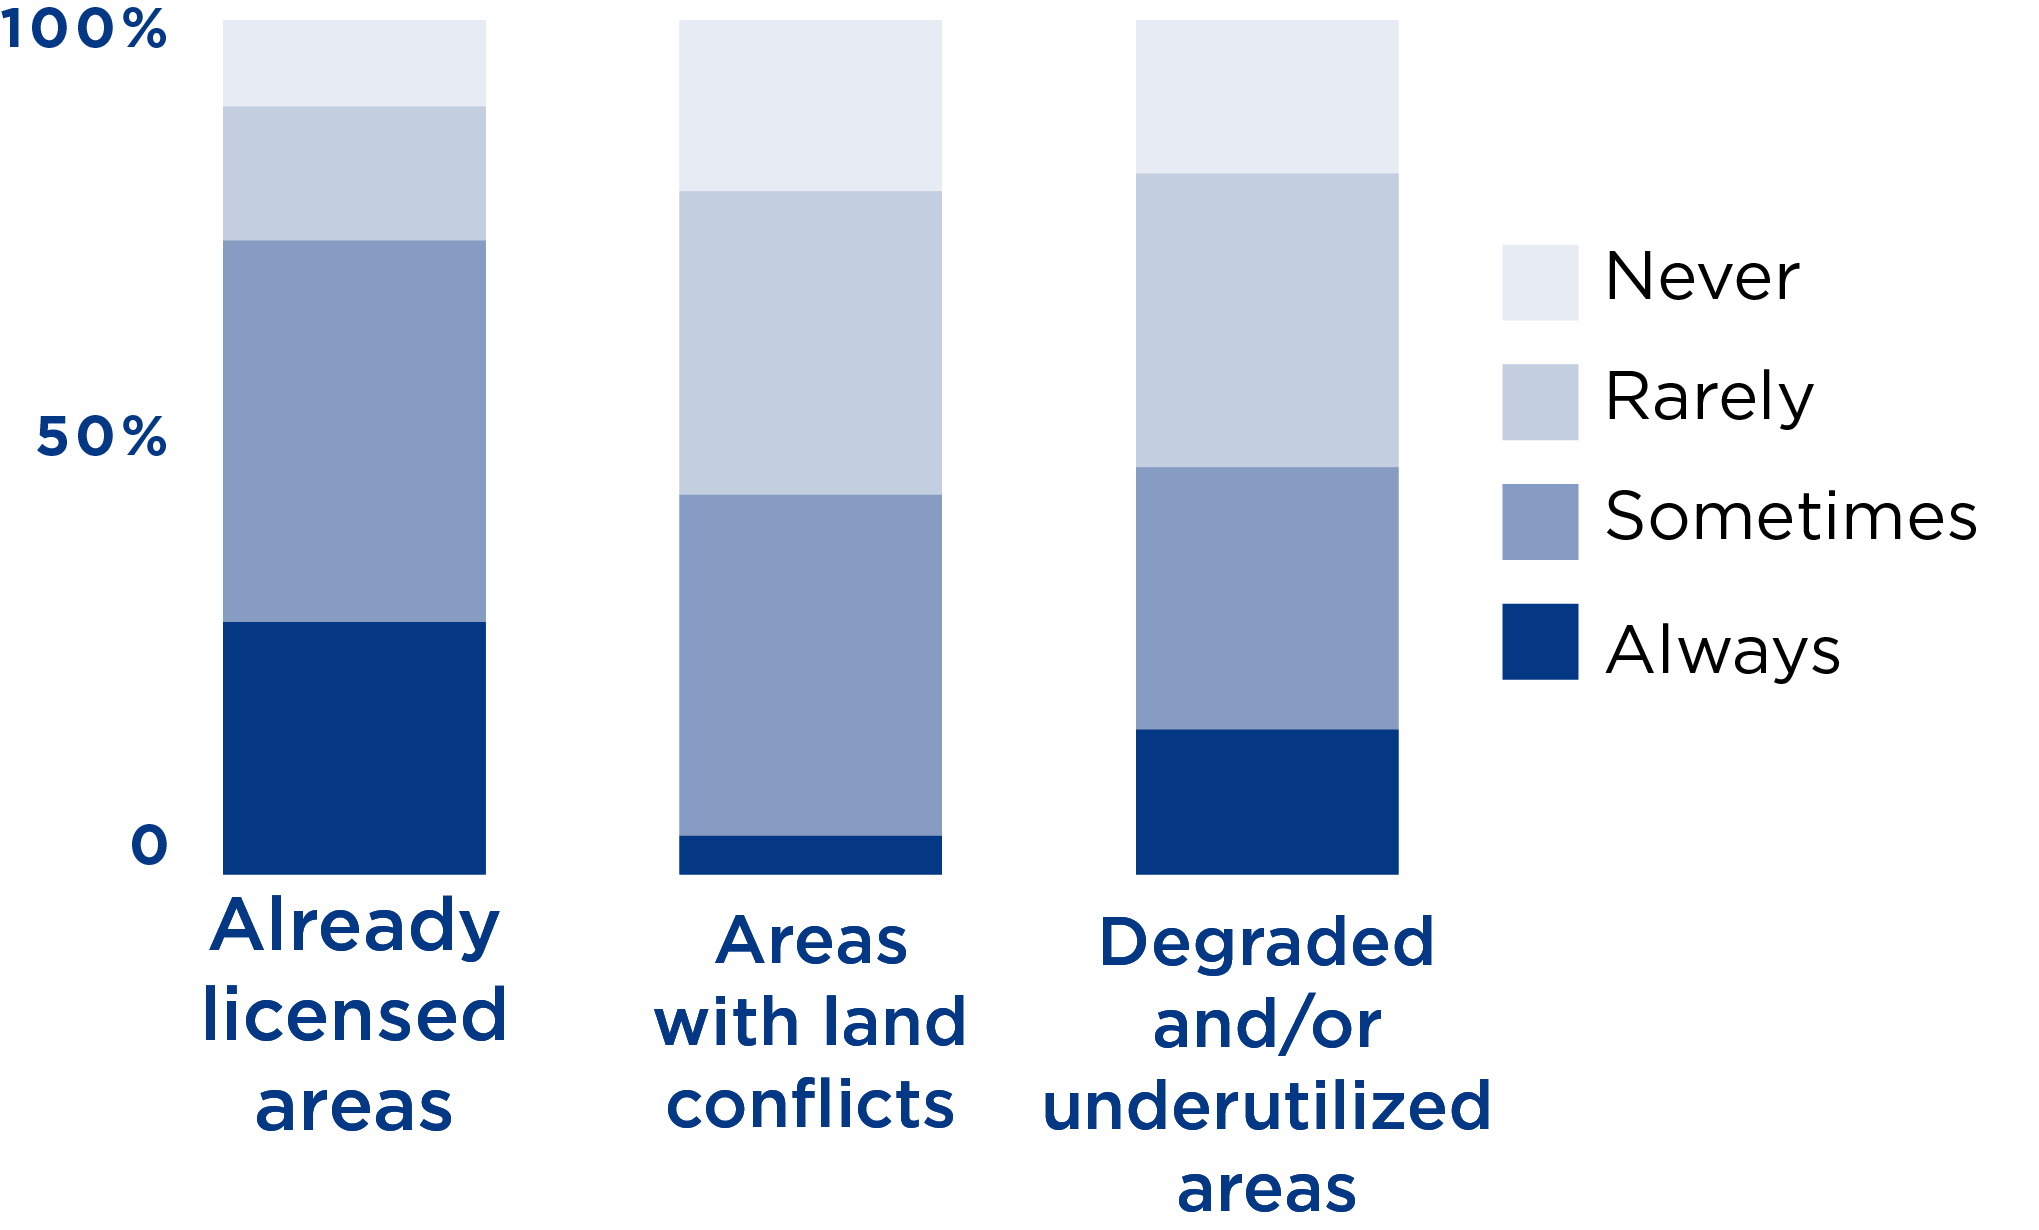 Stacked bar chart showing geospatial data use when identifying certain areas. For already licensed areas, always and sometimes is most common. For areas with land conflicts, sometimes and rarely are most common. For degraded and/or underutilied areas, sometimes and rarely are also most common.